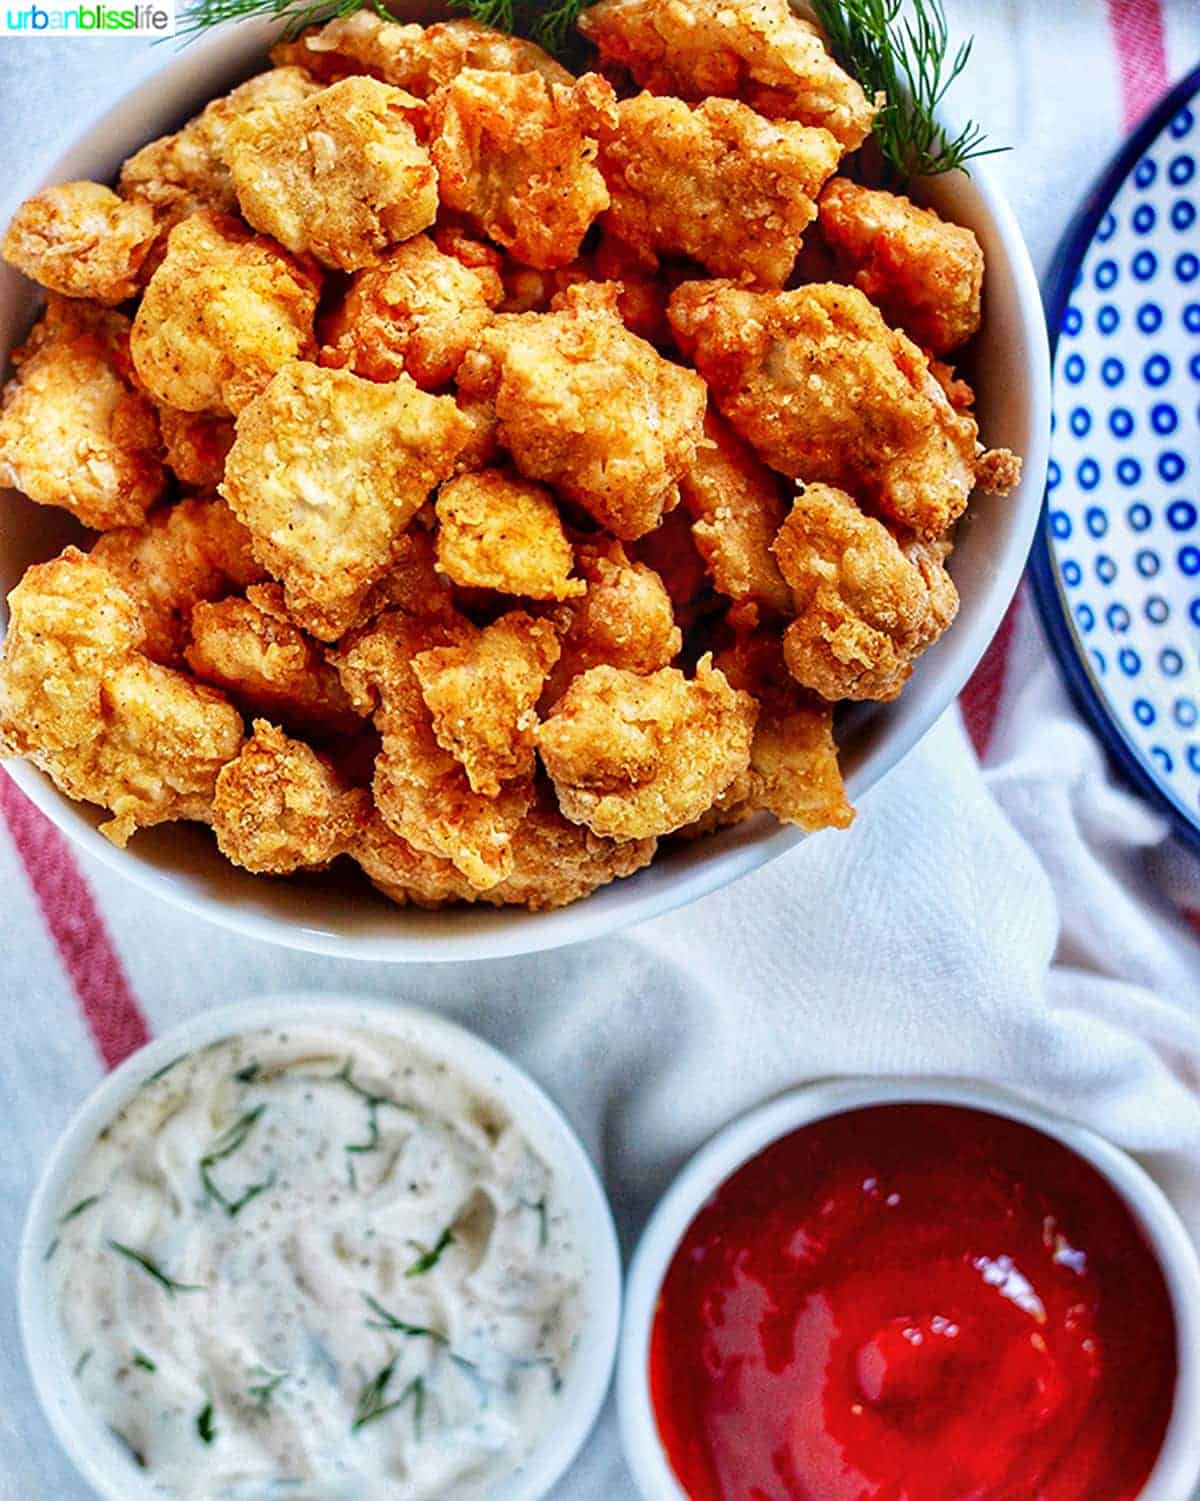 bowl full of crispy Air Fryer Popcorn Chicken with dipping sauces.